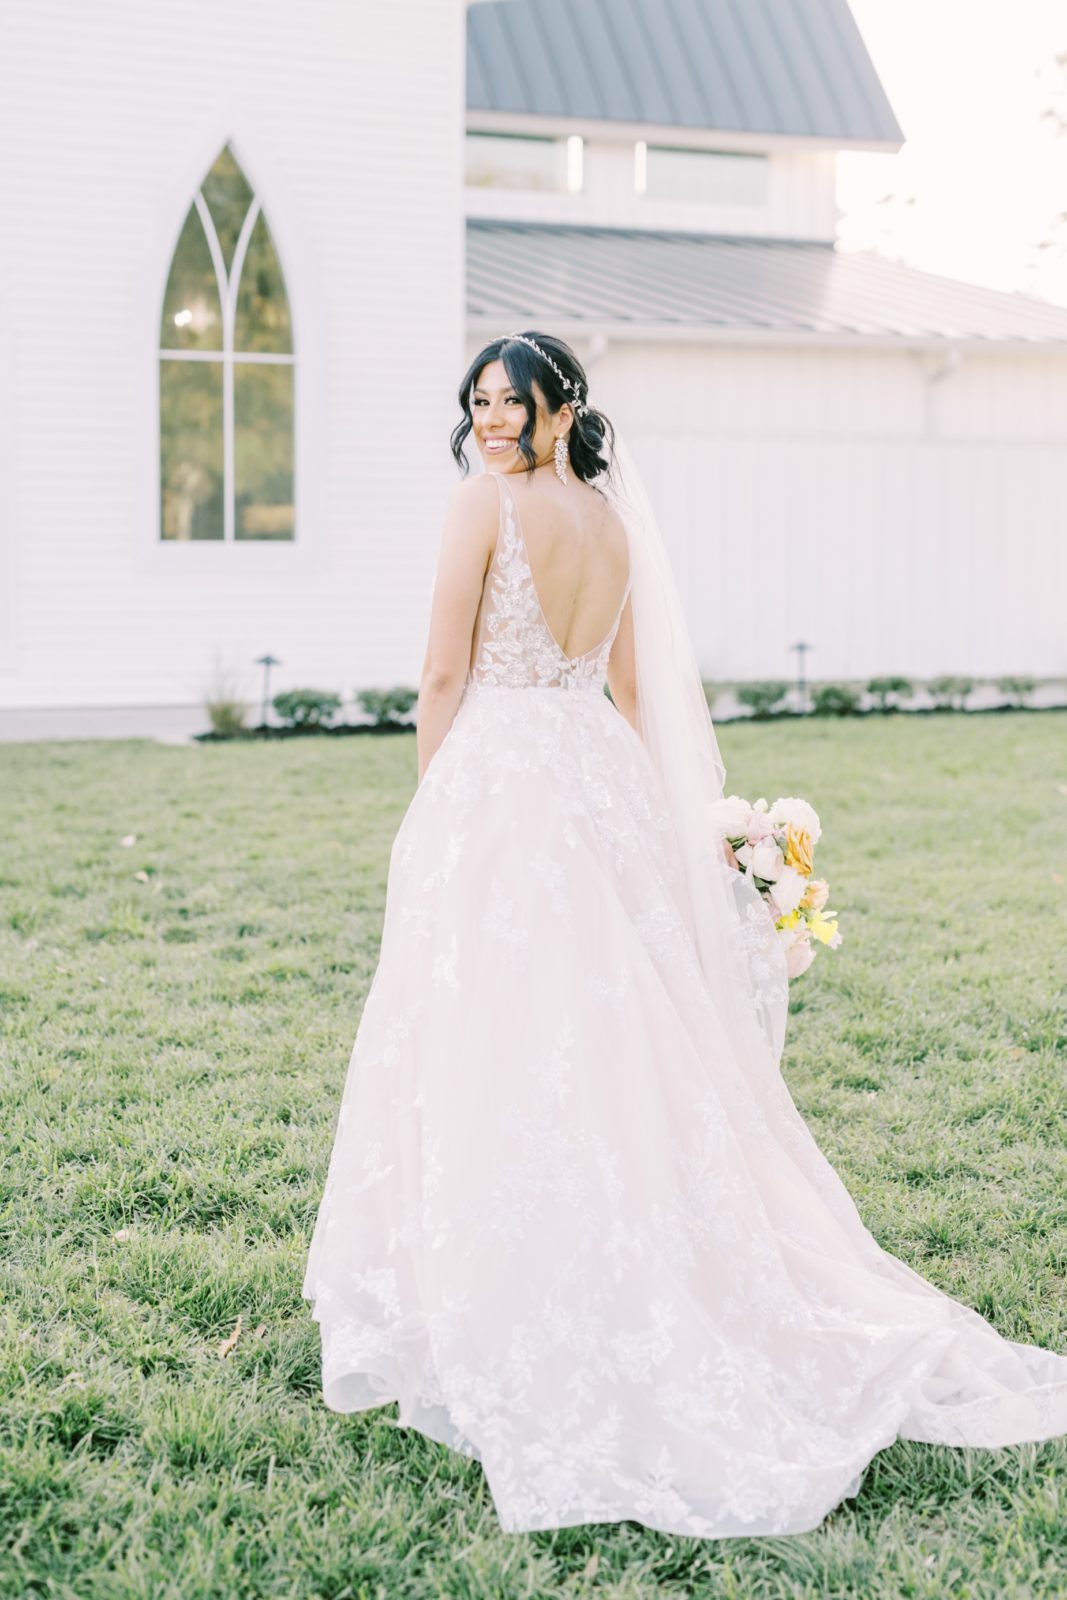 Christina Elliott Photography captures a bride with an updo and scoops back on her wedding day. Southern wedding vibes scoop back gown #ChristinaElliottPhotography #ChristinaElliottWeddings #Houstonwedding #TheSpringsVenue #EastHoustonweddings